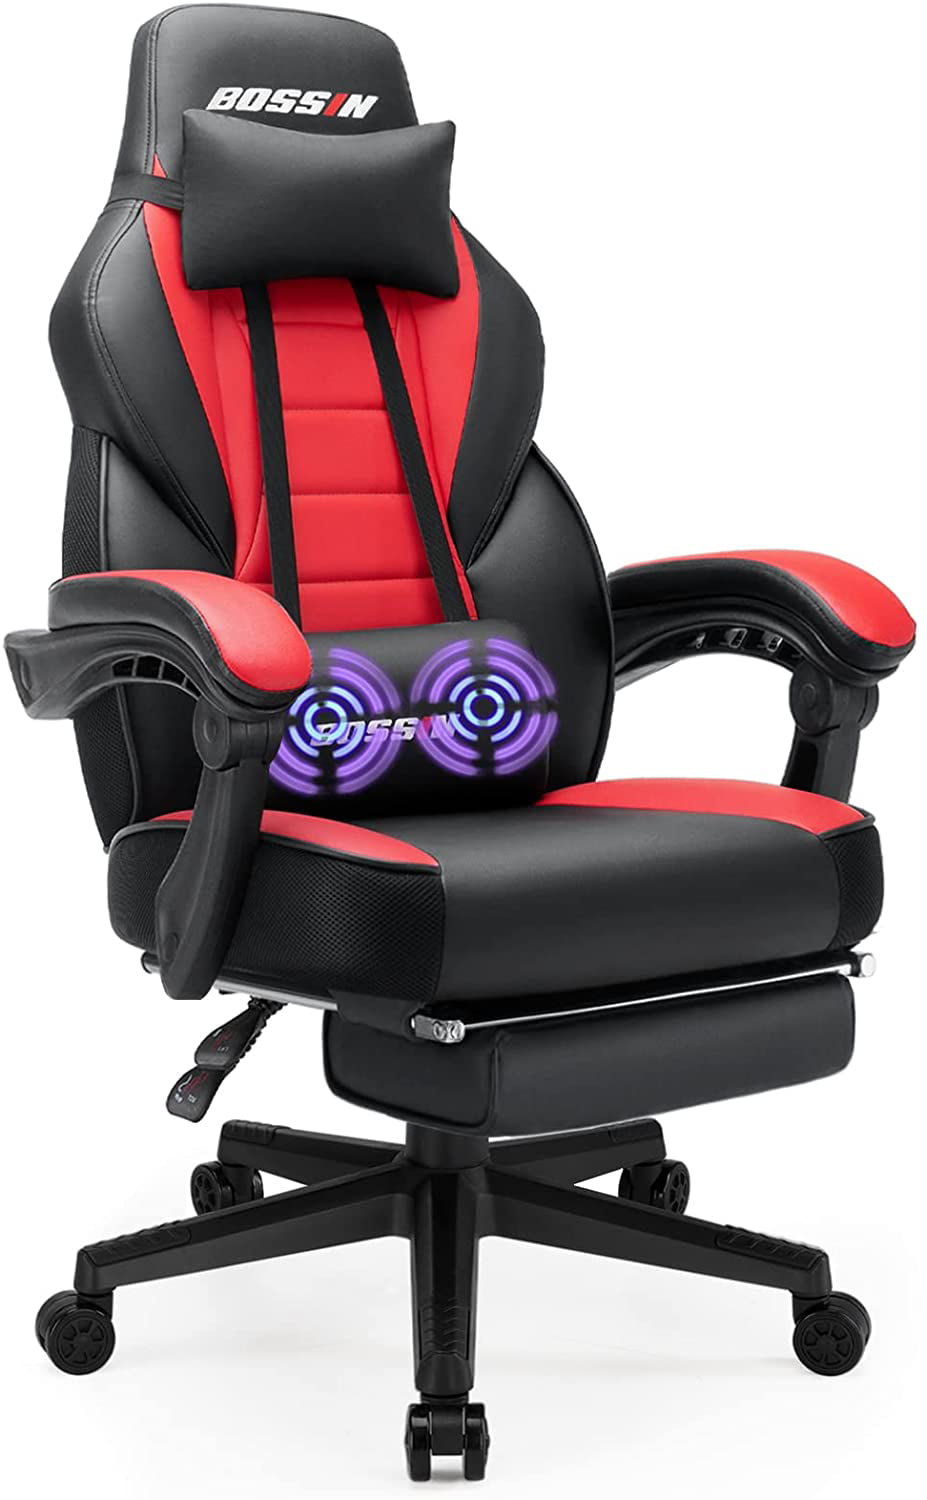 Respawn 105 Racing Style Gaming Computer Chair RED 